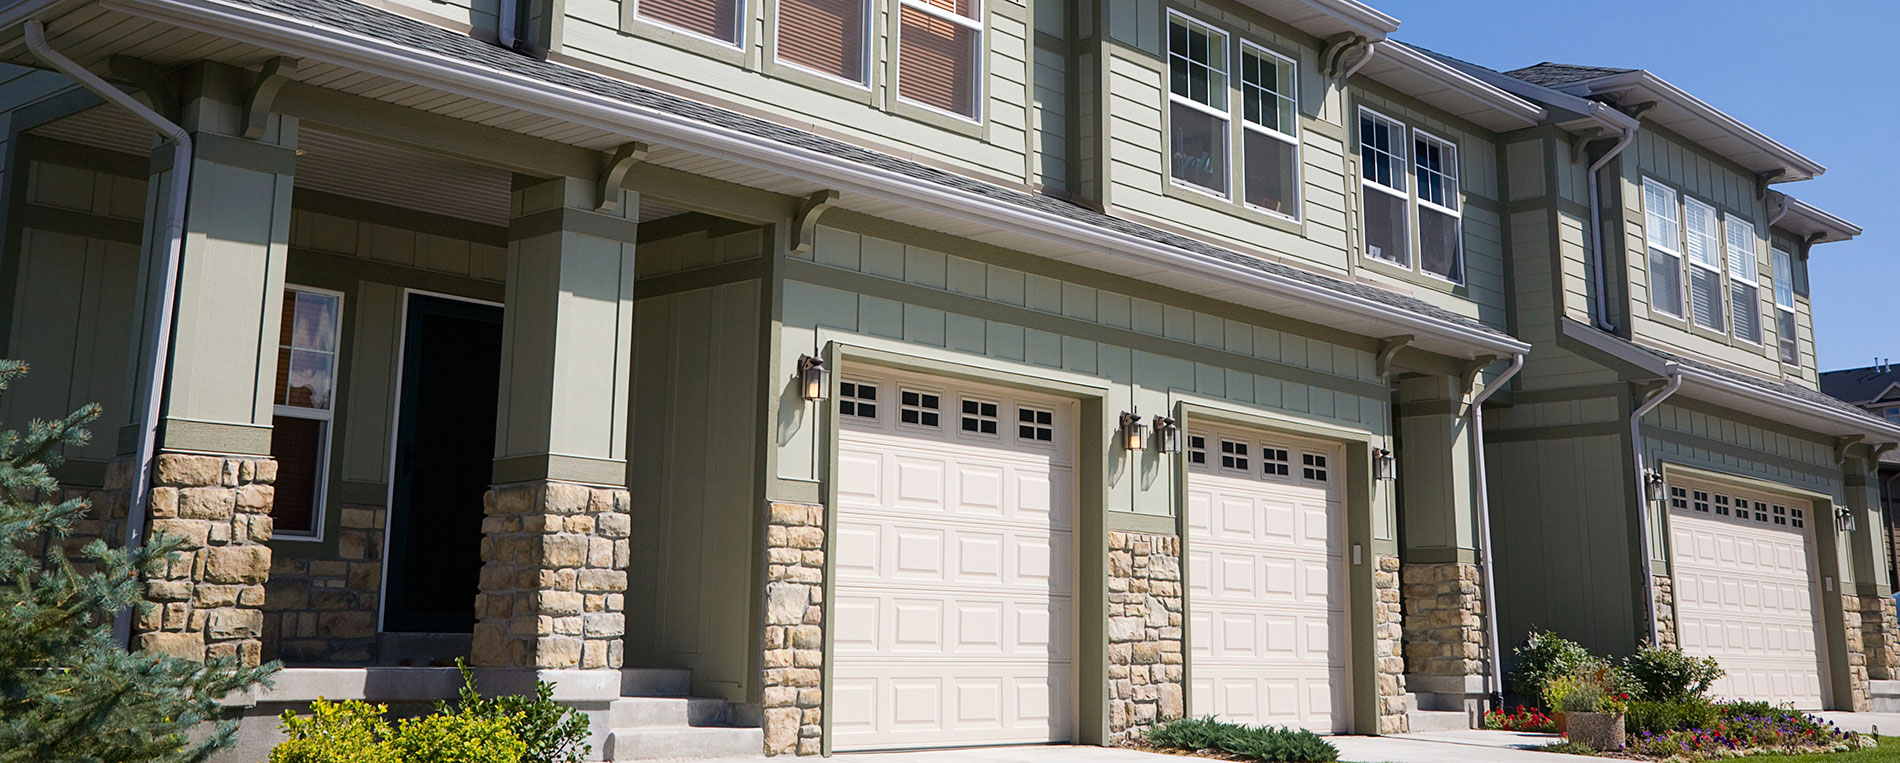 What to Do If You Lose Your Garage Door Remote